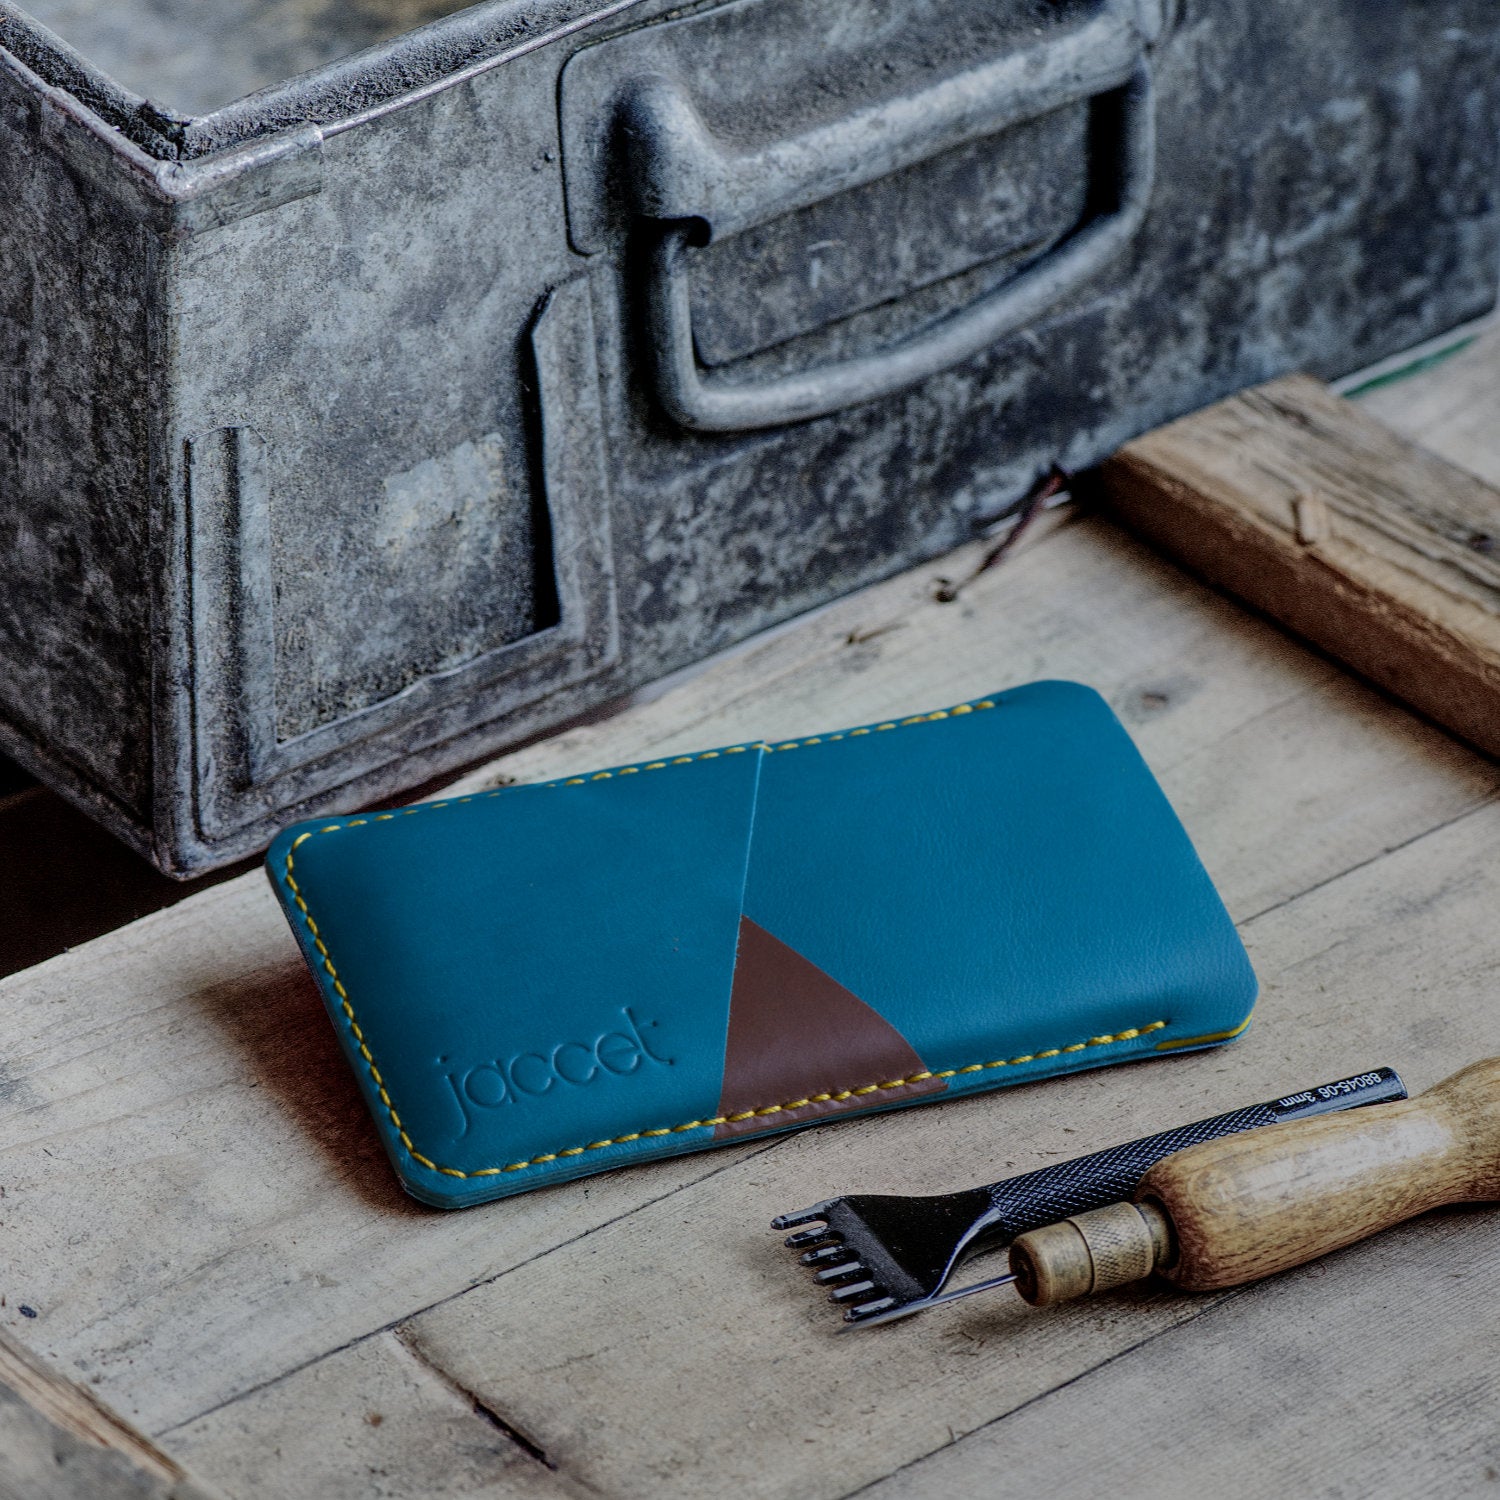 Full-grain leather Xiaomi sleeve - Turquoise leather with two pockets for cards